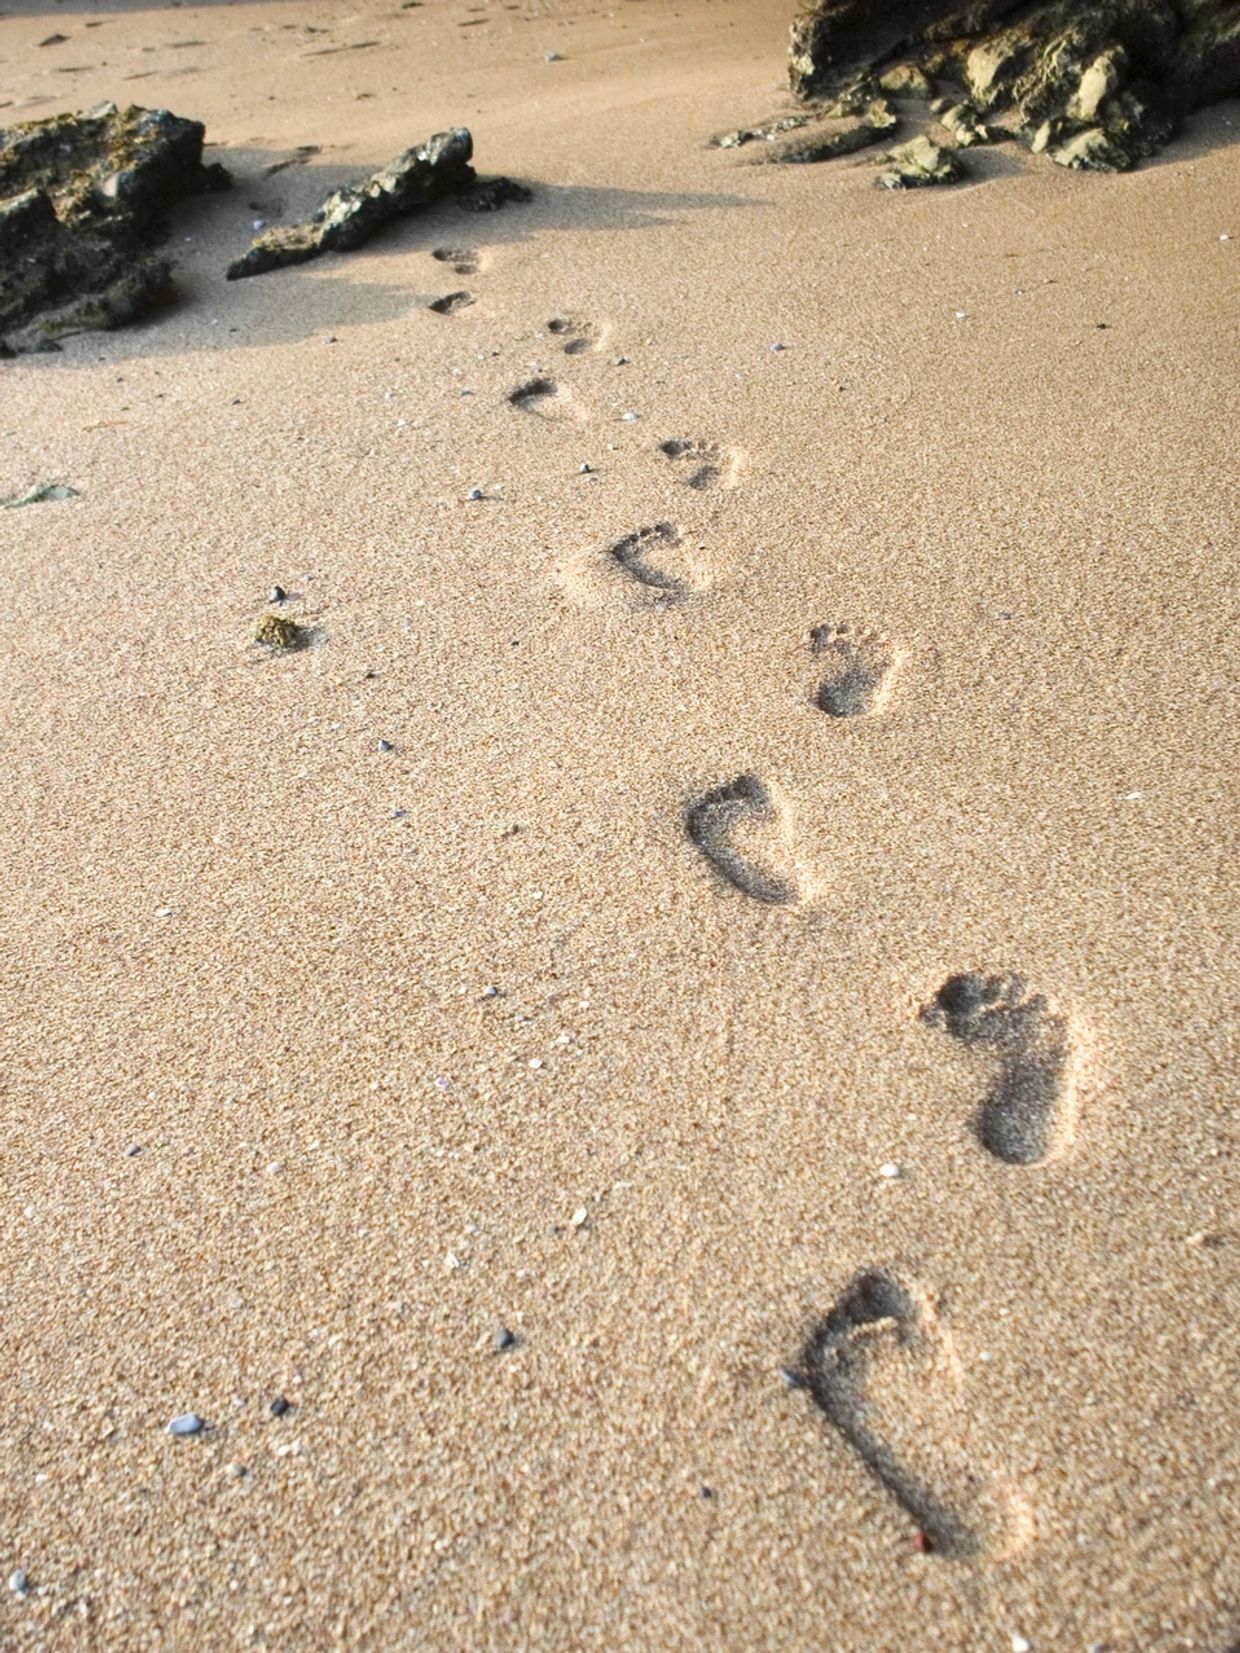 View of the footsteps in the sand on the display